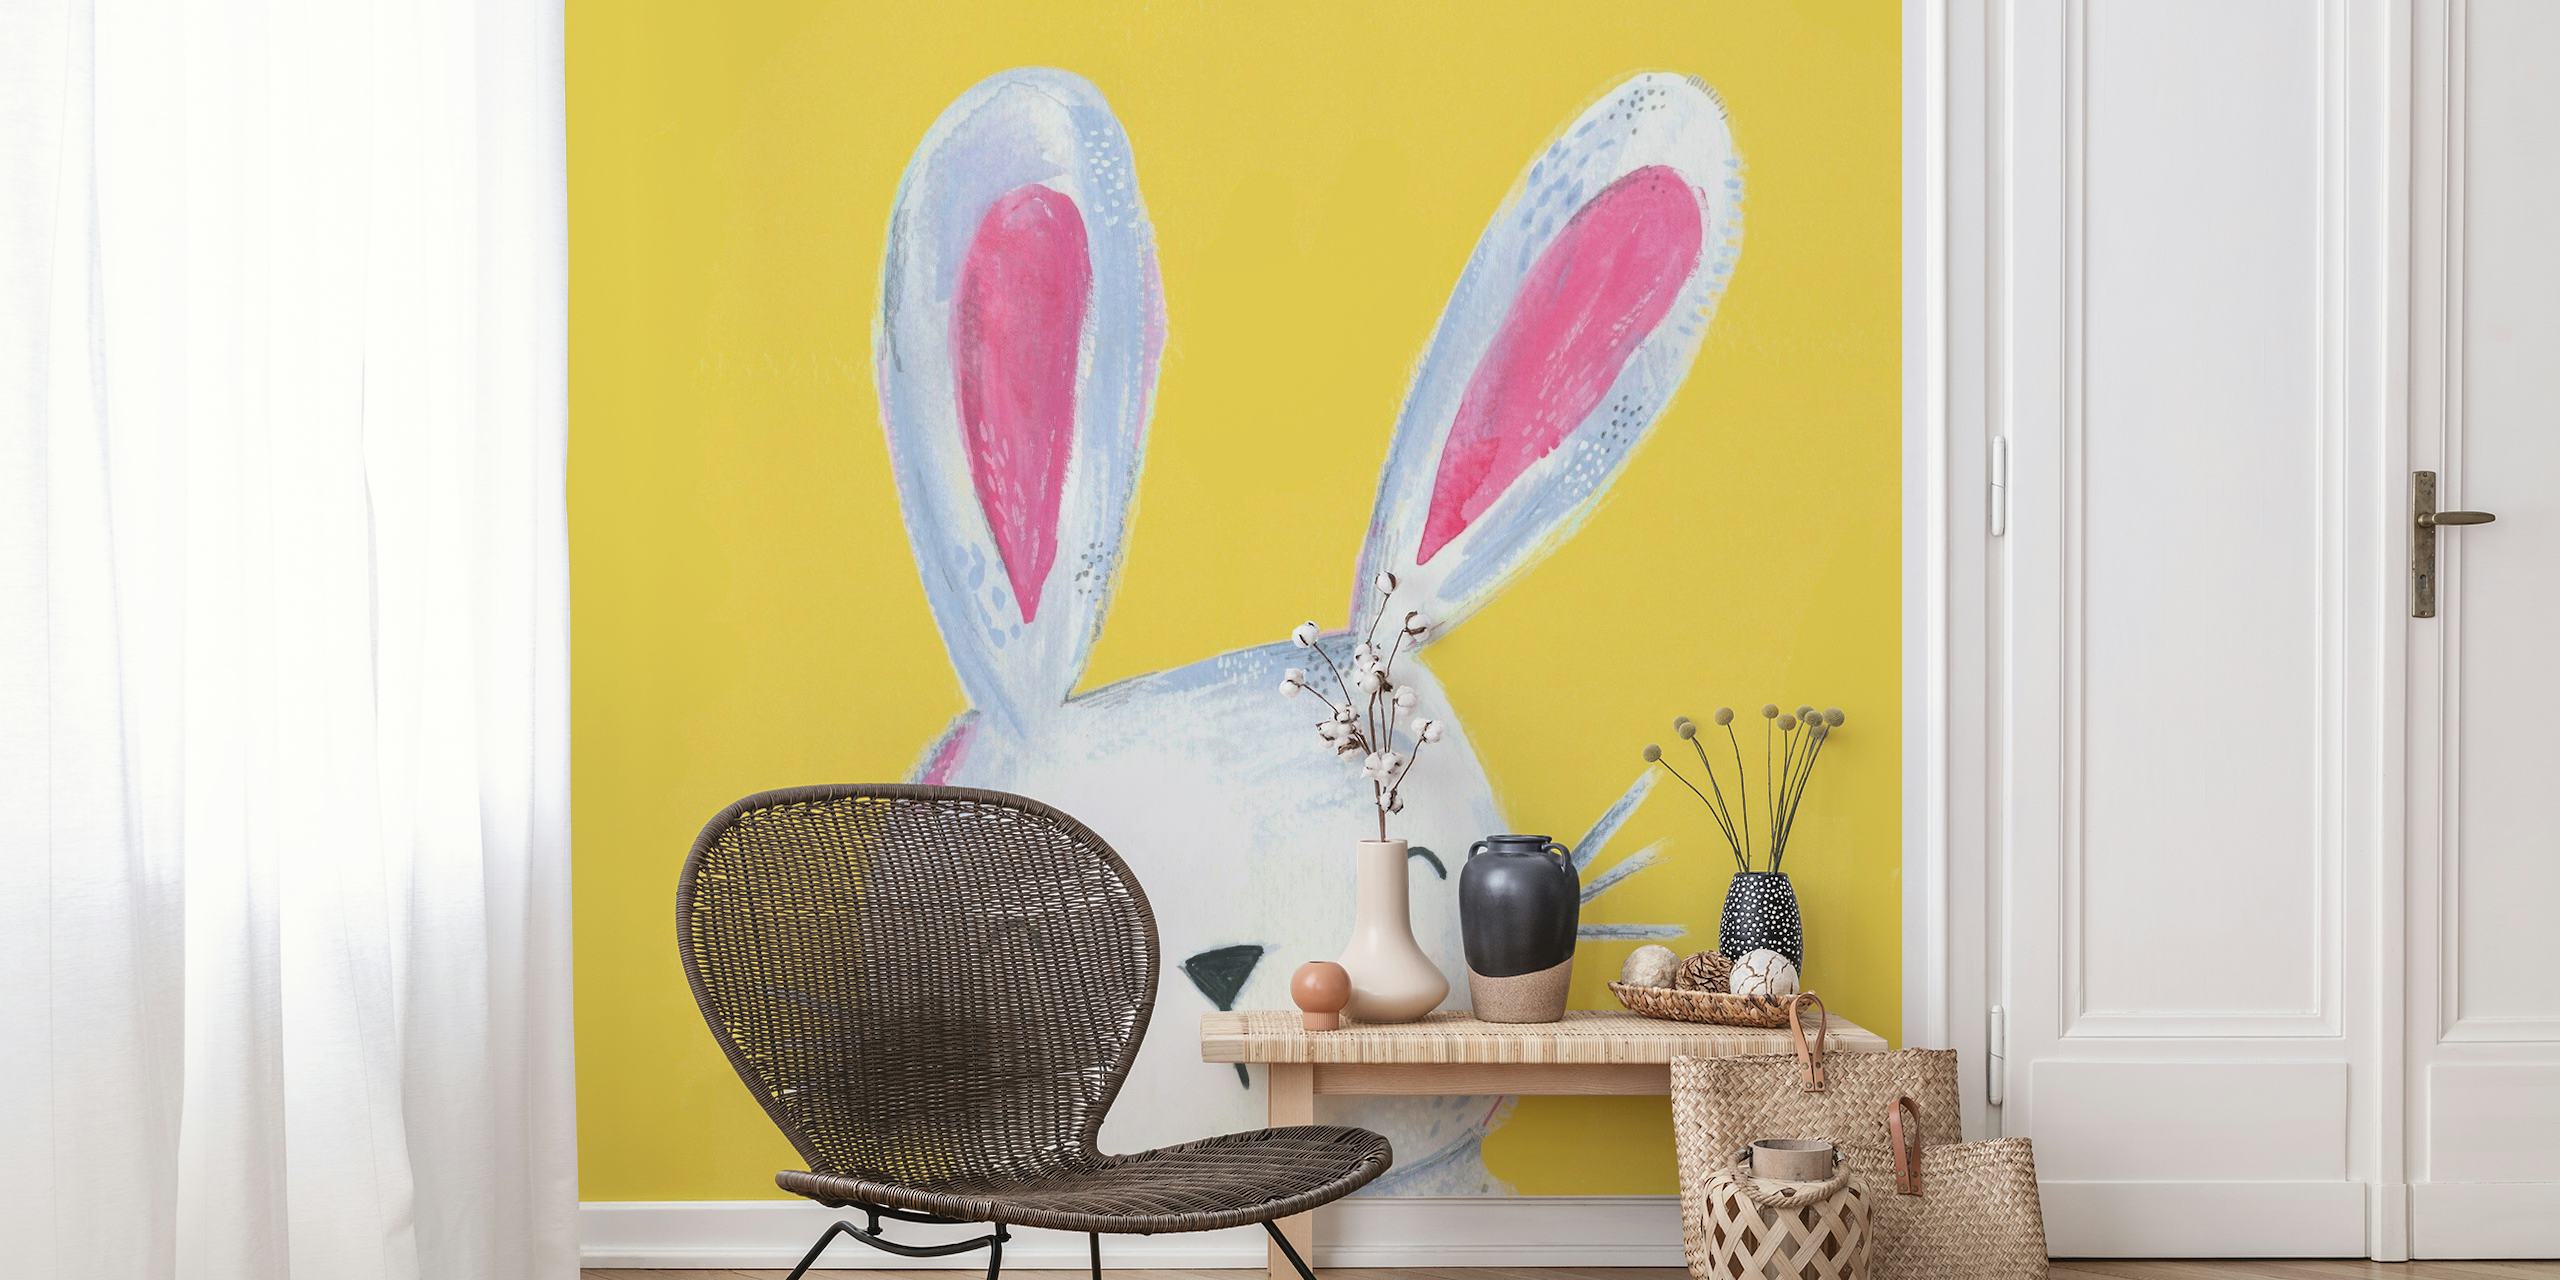 Painted bunny on yellow tapete